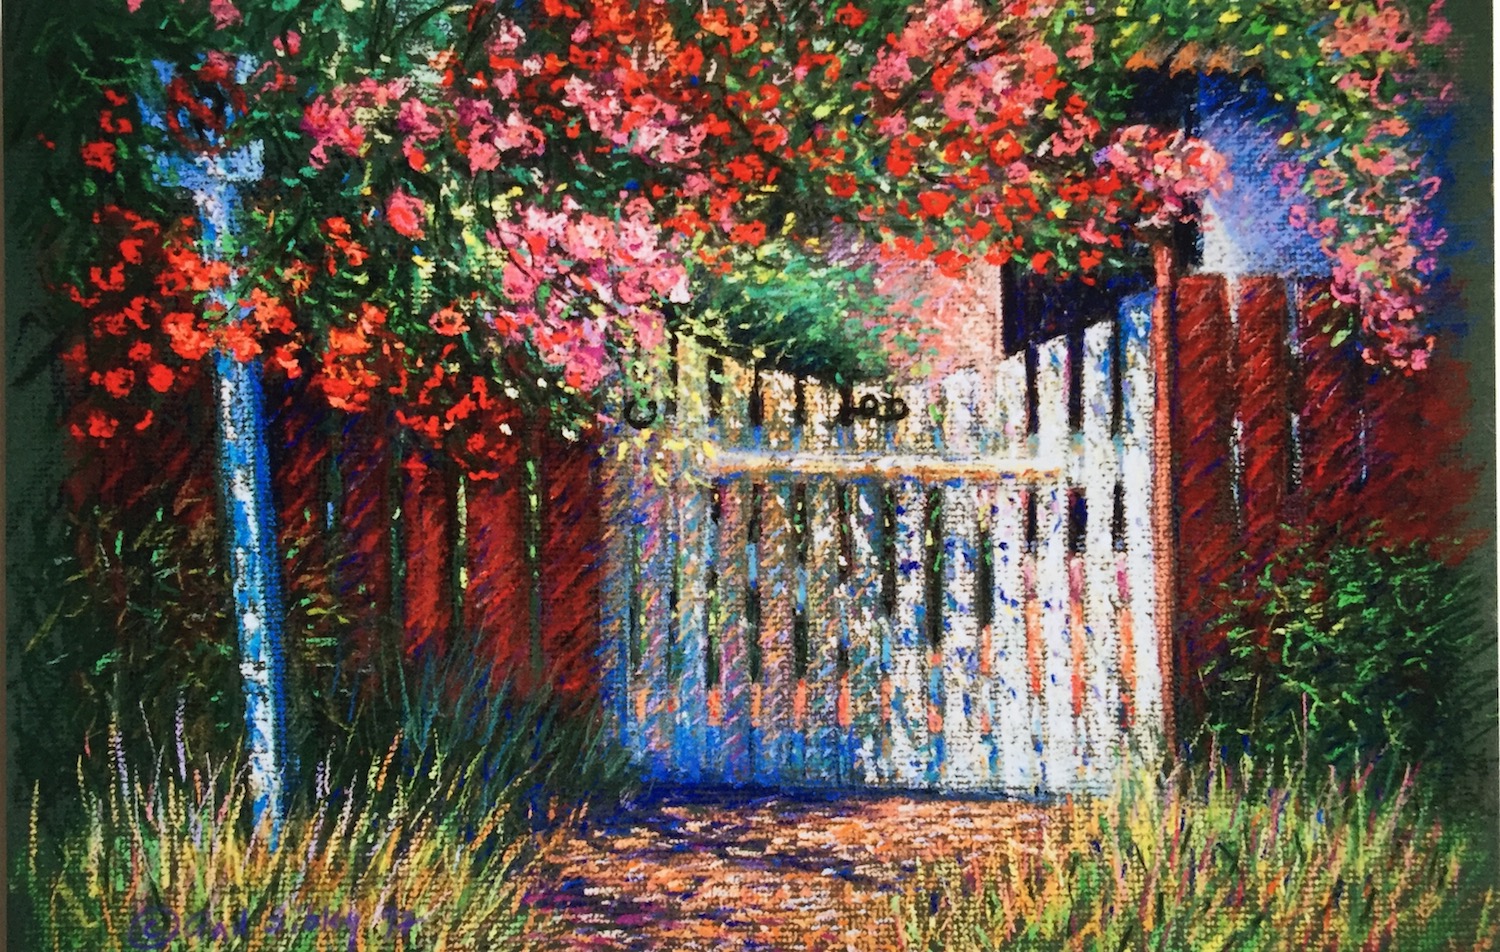 Finding Your Style: Gail Sibley, "Garden Gate," c. 1996, pastel on mat board, approx 16 x 20 in